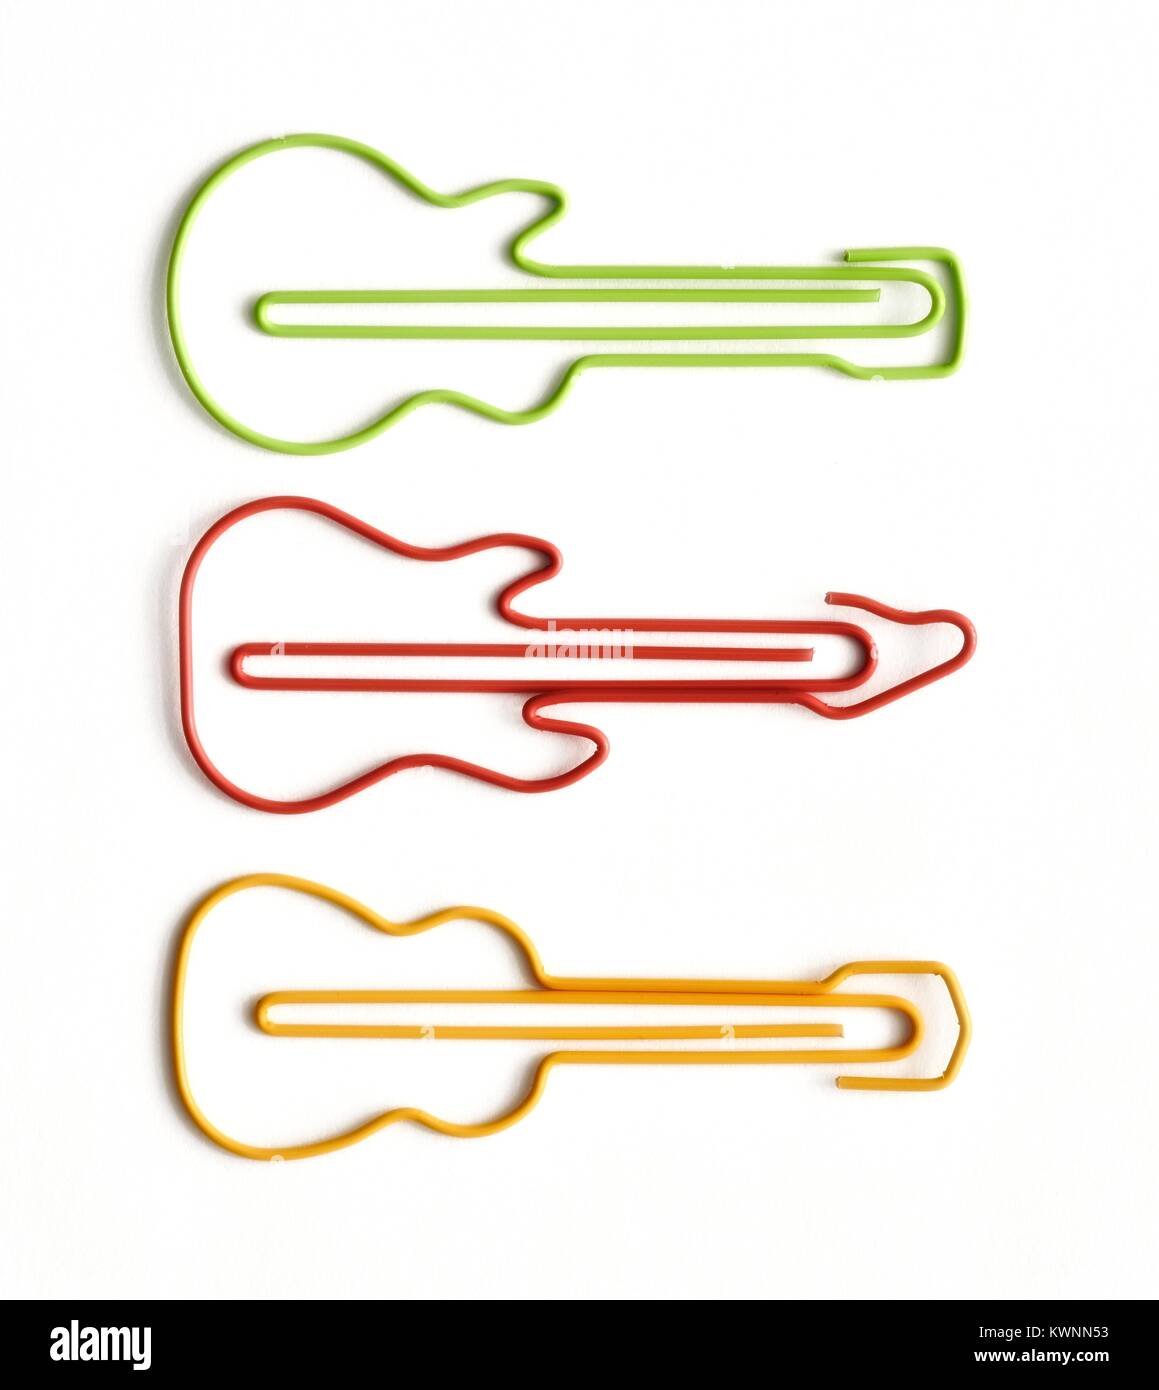 colorful guitar shaped novelty paper clip Stock Photo